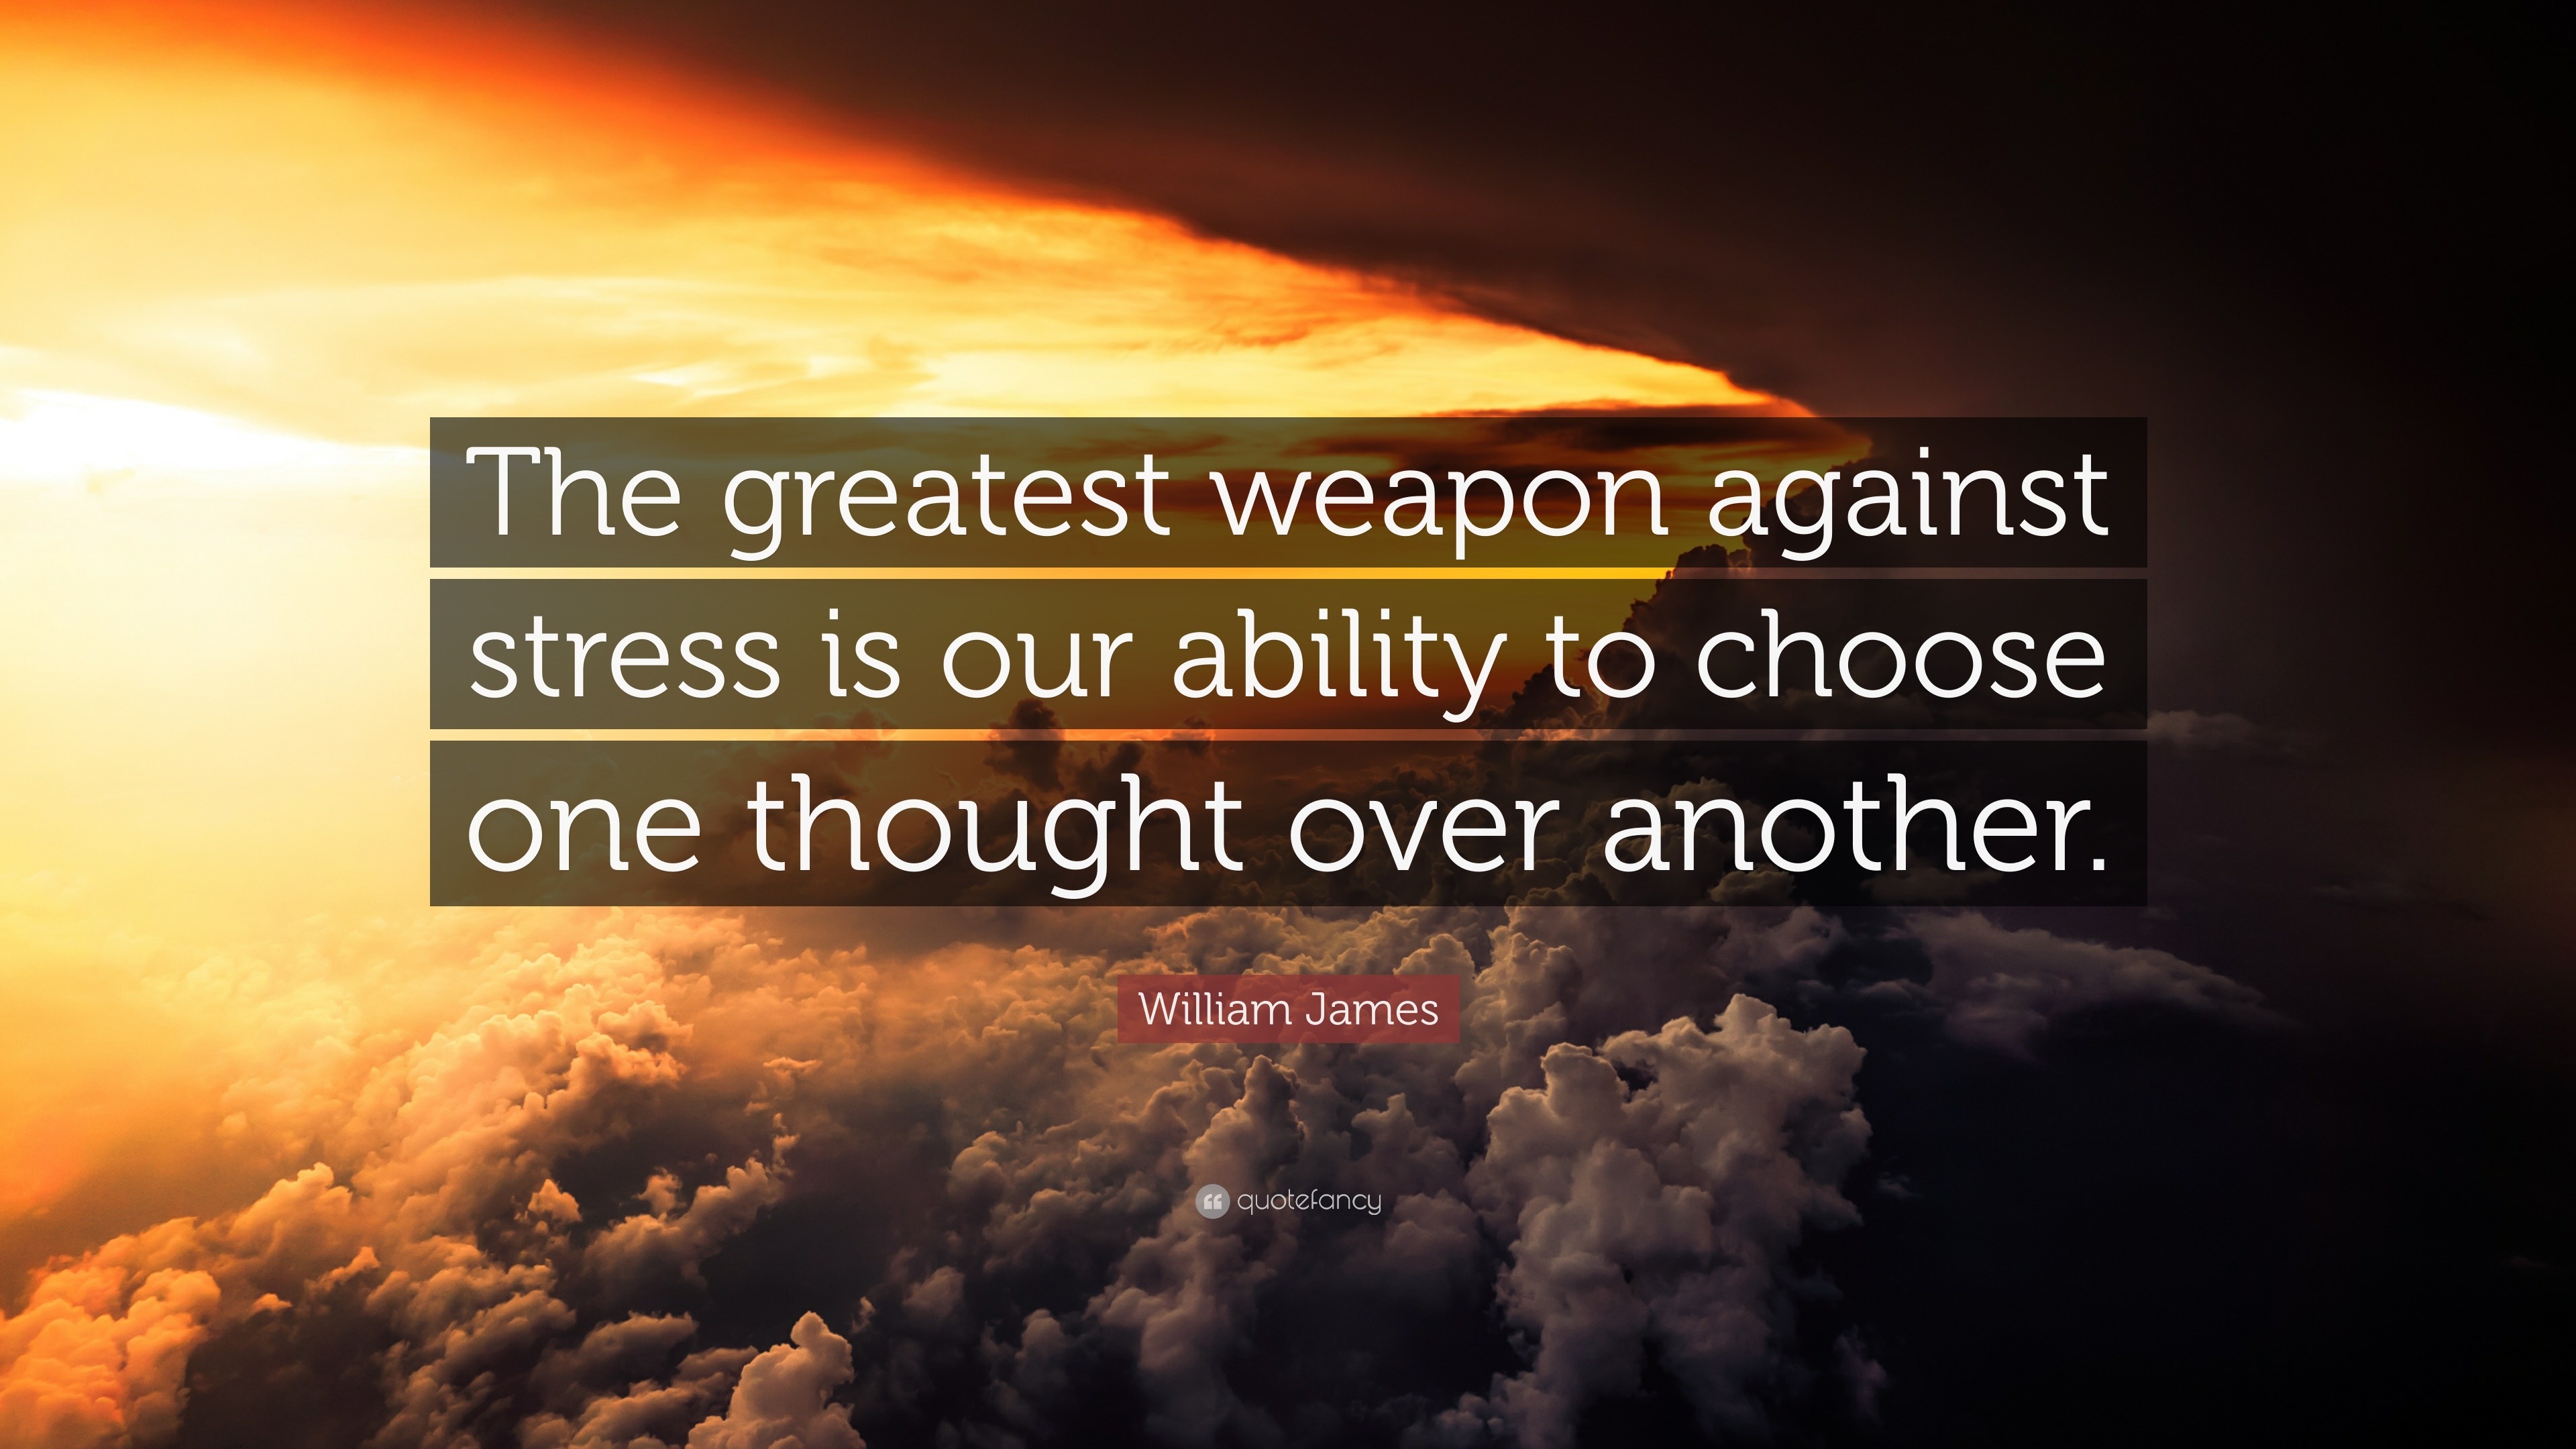 William James Quote: “The greatest weapon against stress is our ability